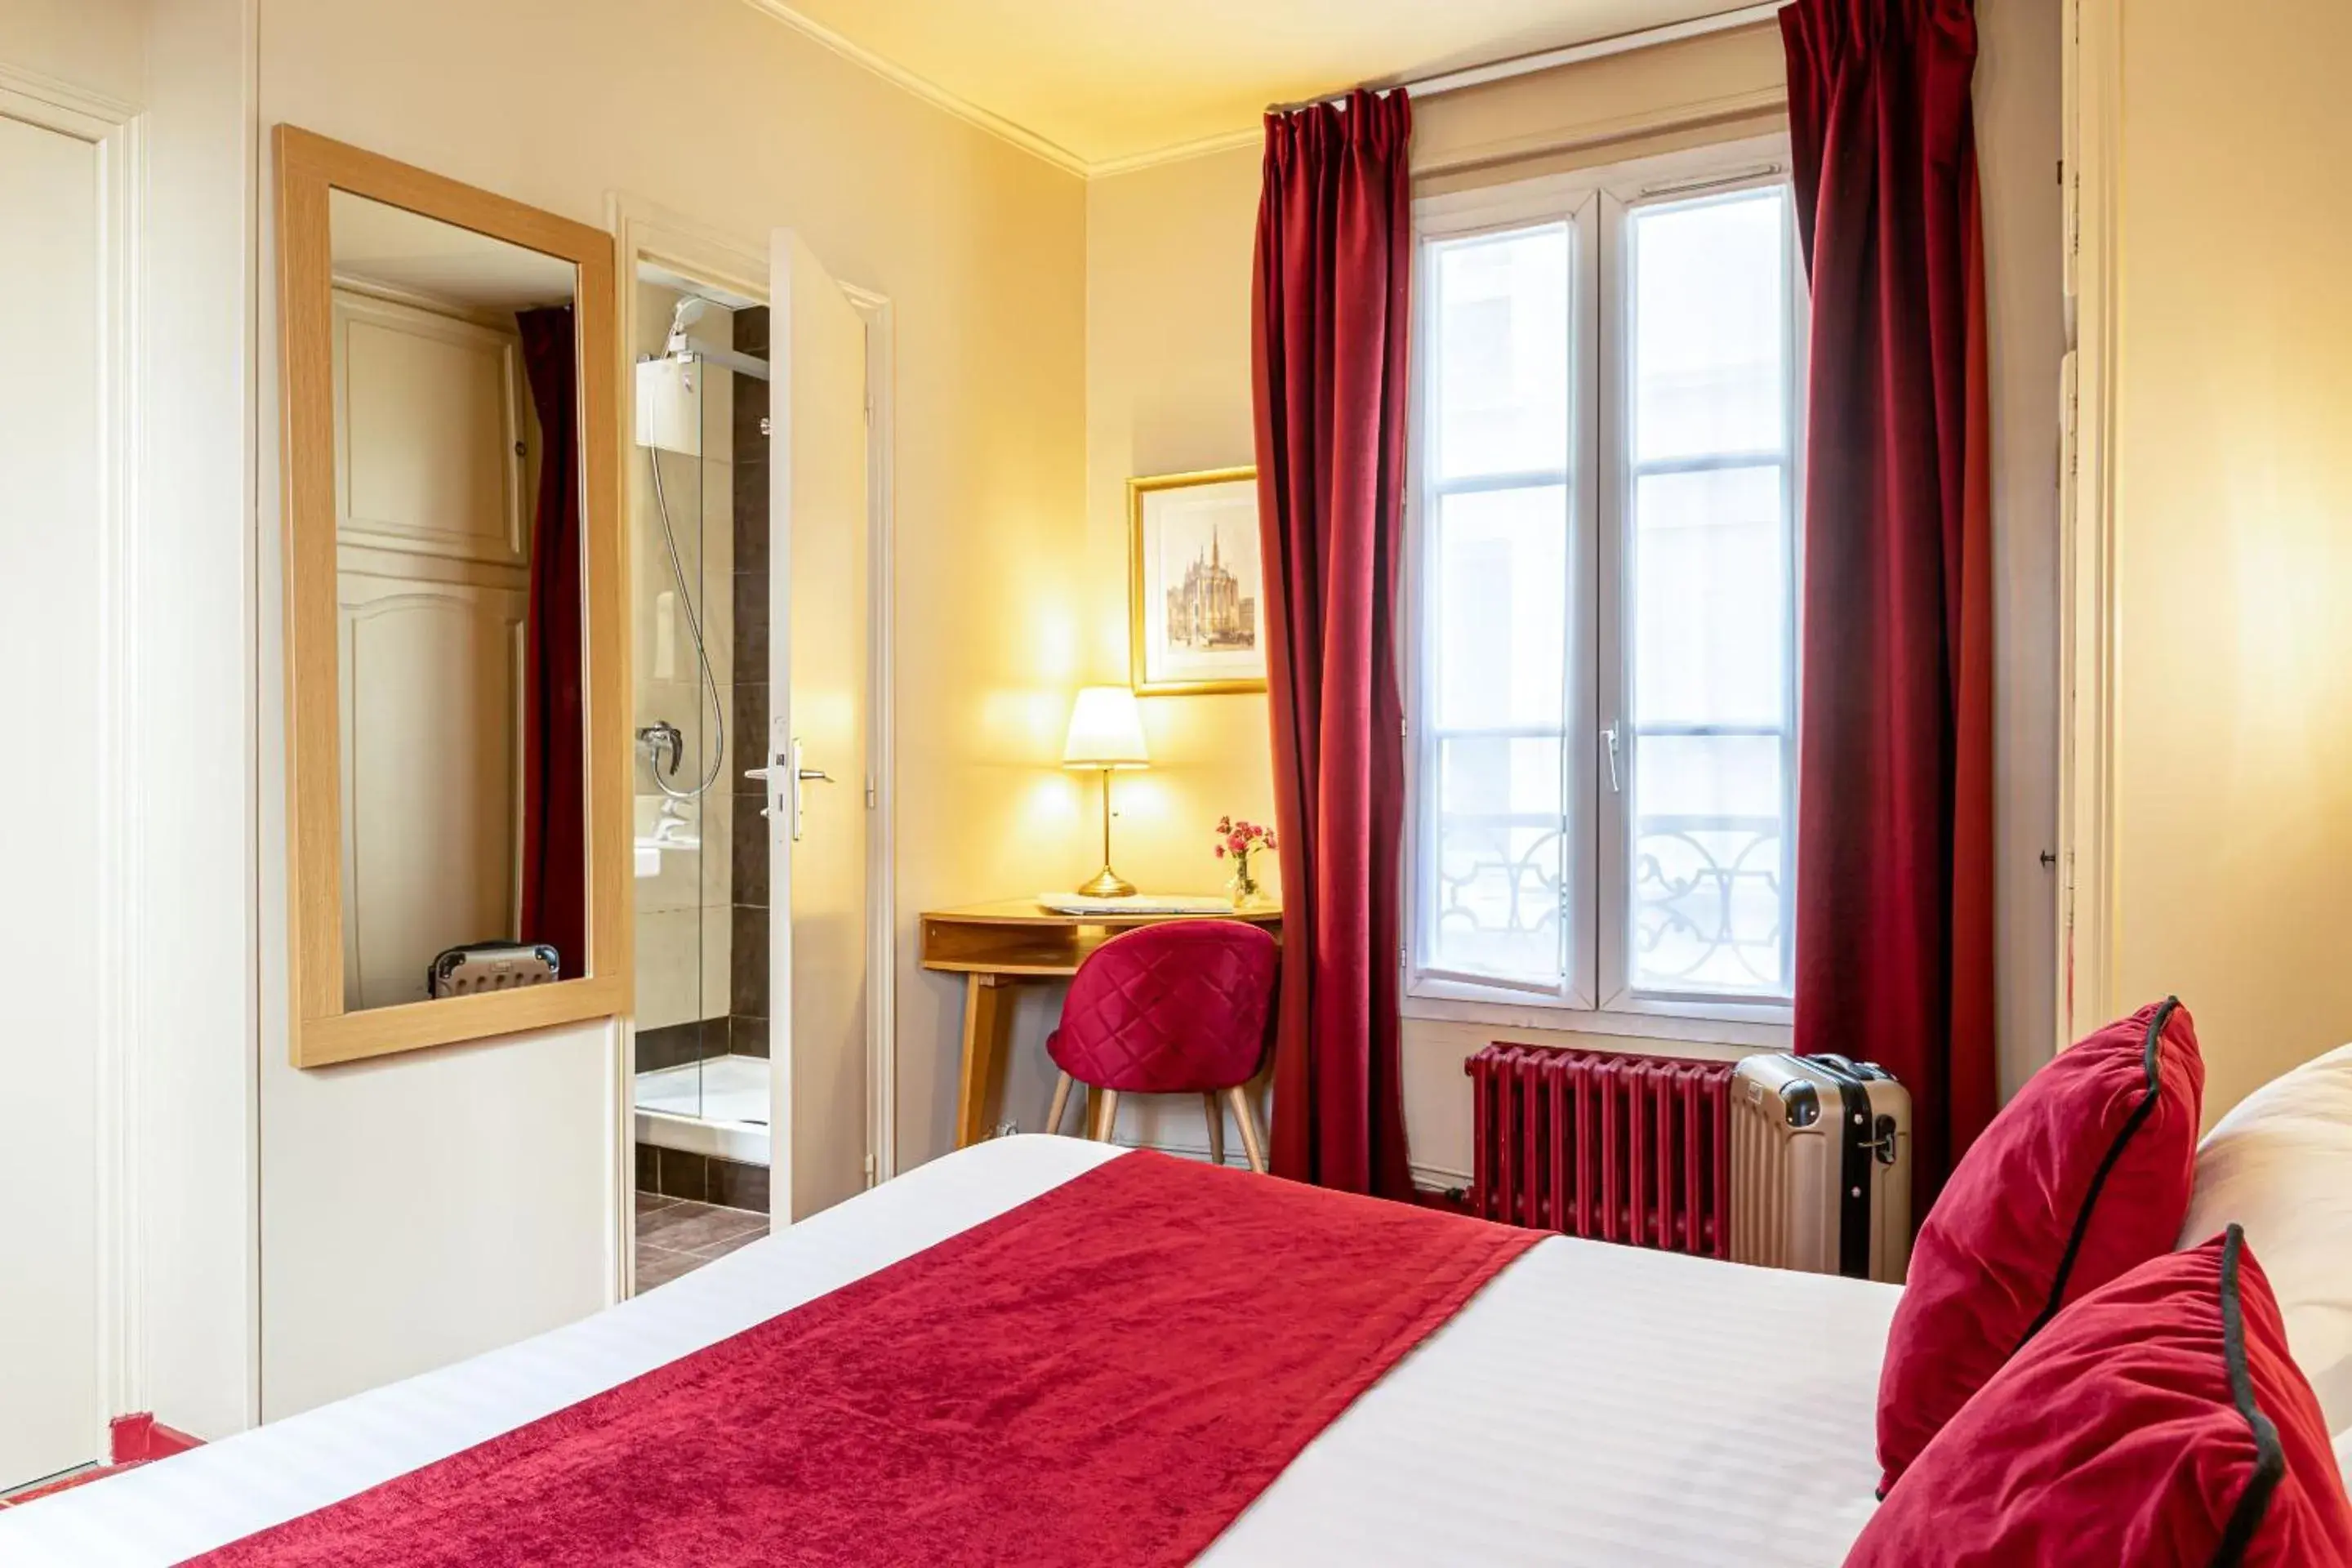 Shower, Bed in Romance Malesherbes by Patrick Hayat